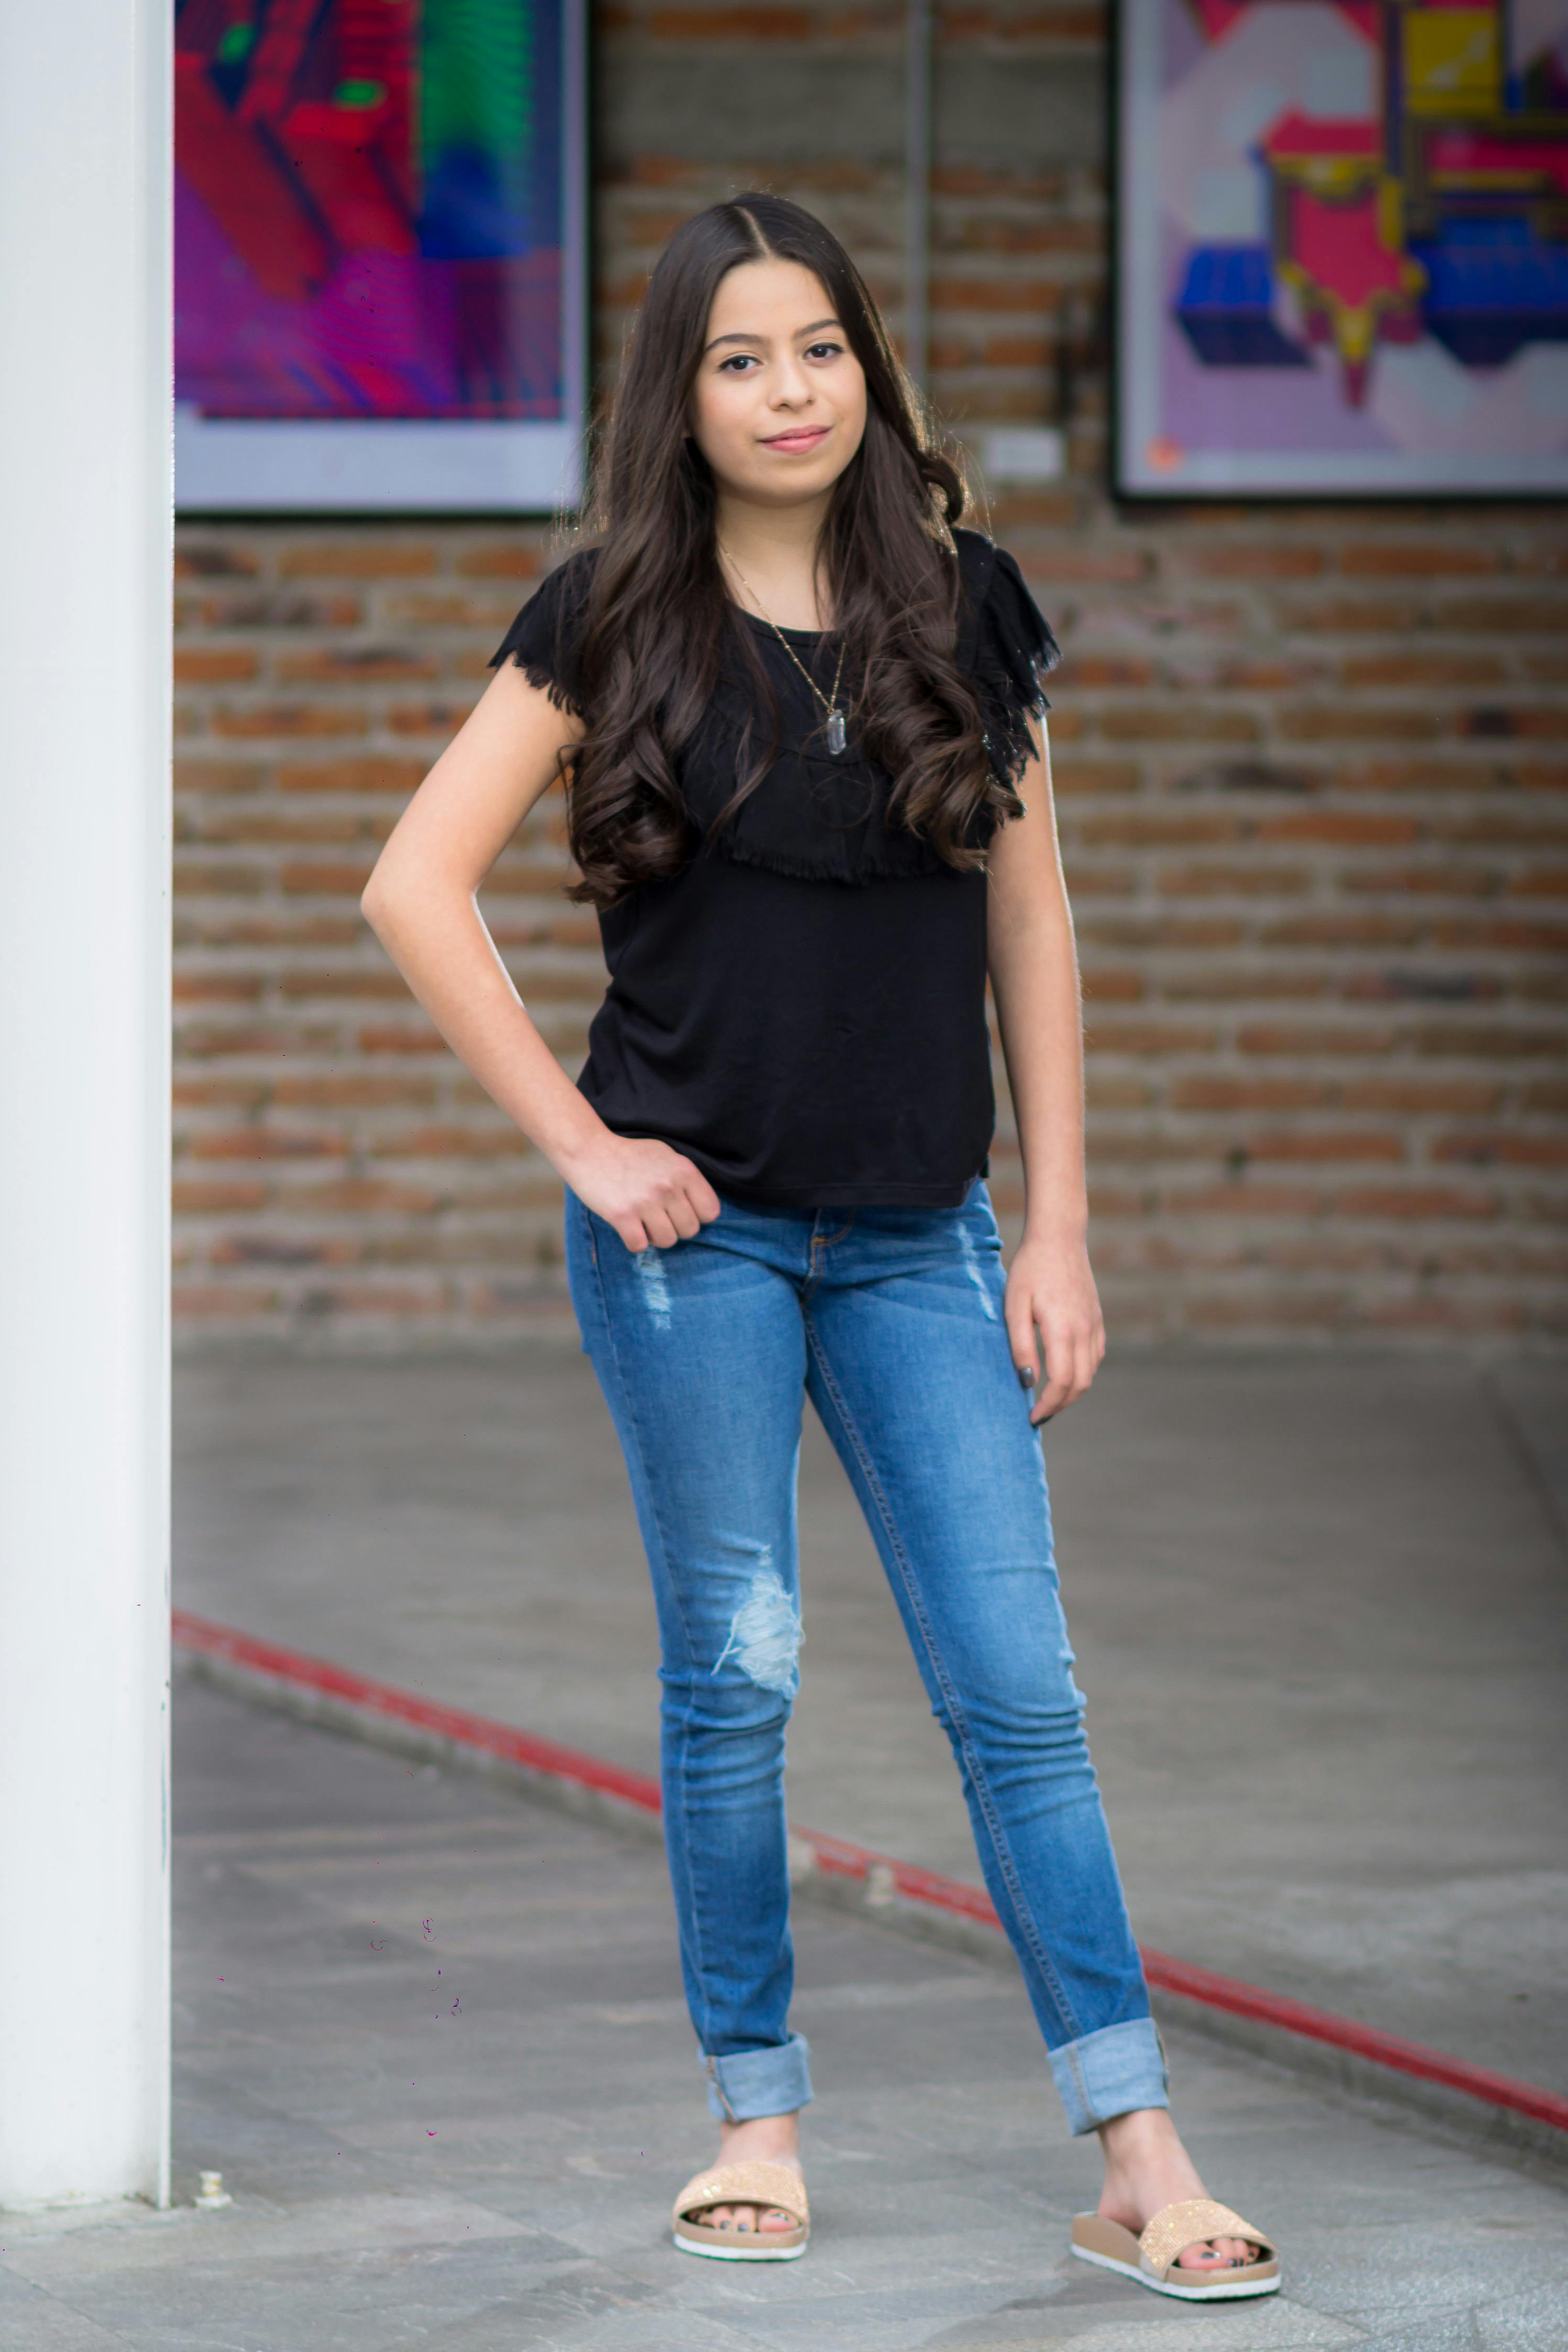 Woman Wearing Black T-shirt And Blue Denim Shorts Picture. Image: 113036035